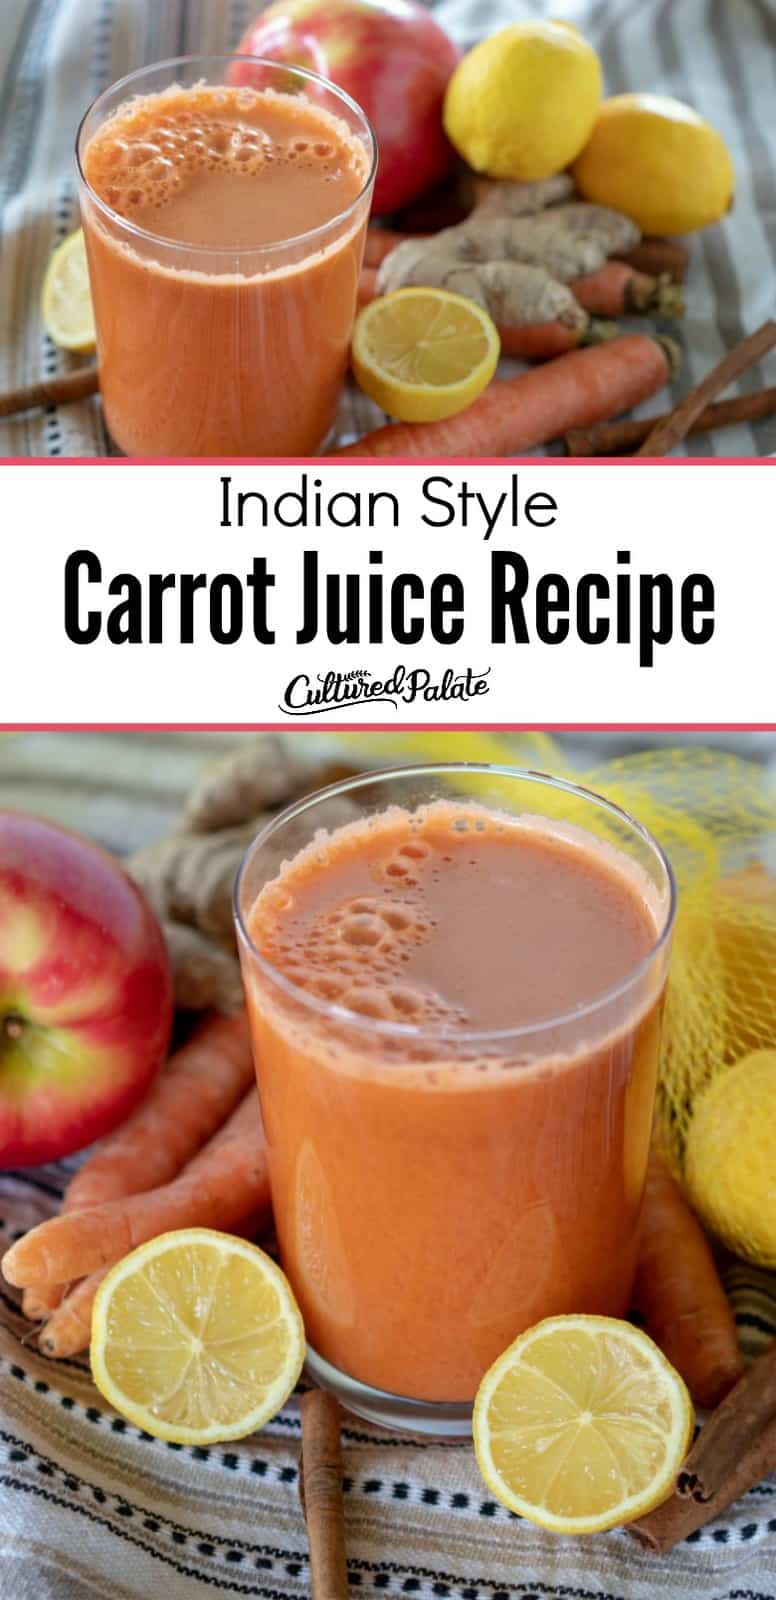 Indian Style Carrot Juice Recipe shown in two images with fruit and veggies around glass and text overlay.